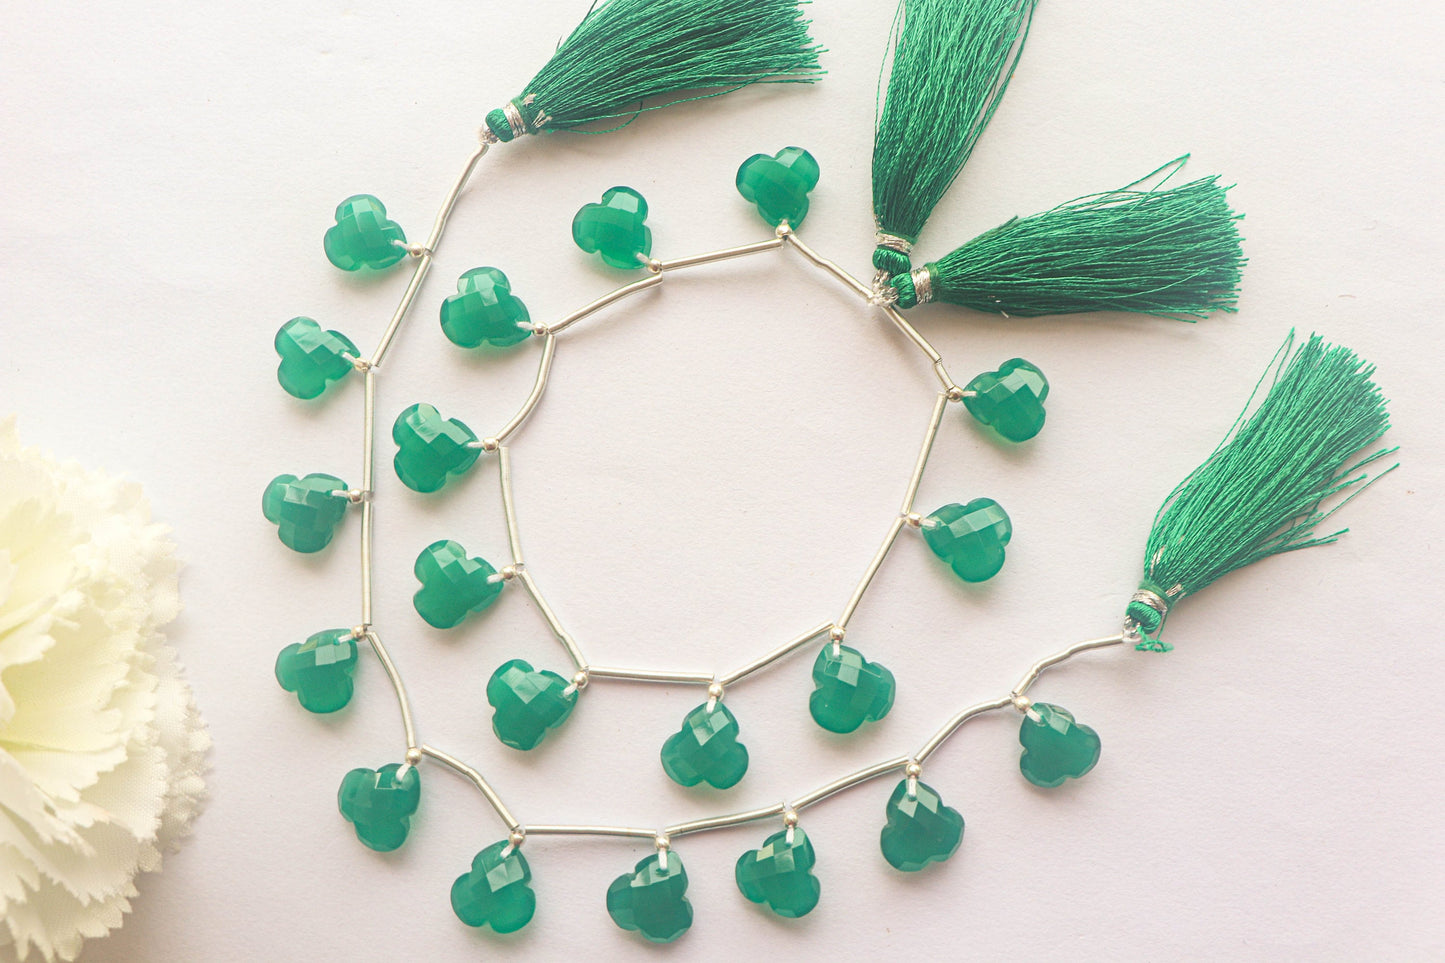 Green Onyx Flower shape Faceted Beads, 8 Inch String, Natural Gemstone, 10 Pieces, 11x11mm, Beadsforyourjewelry